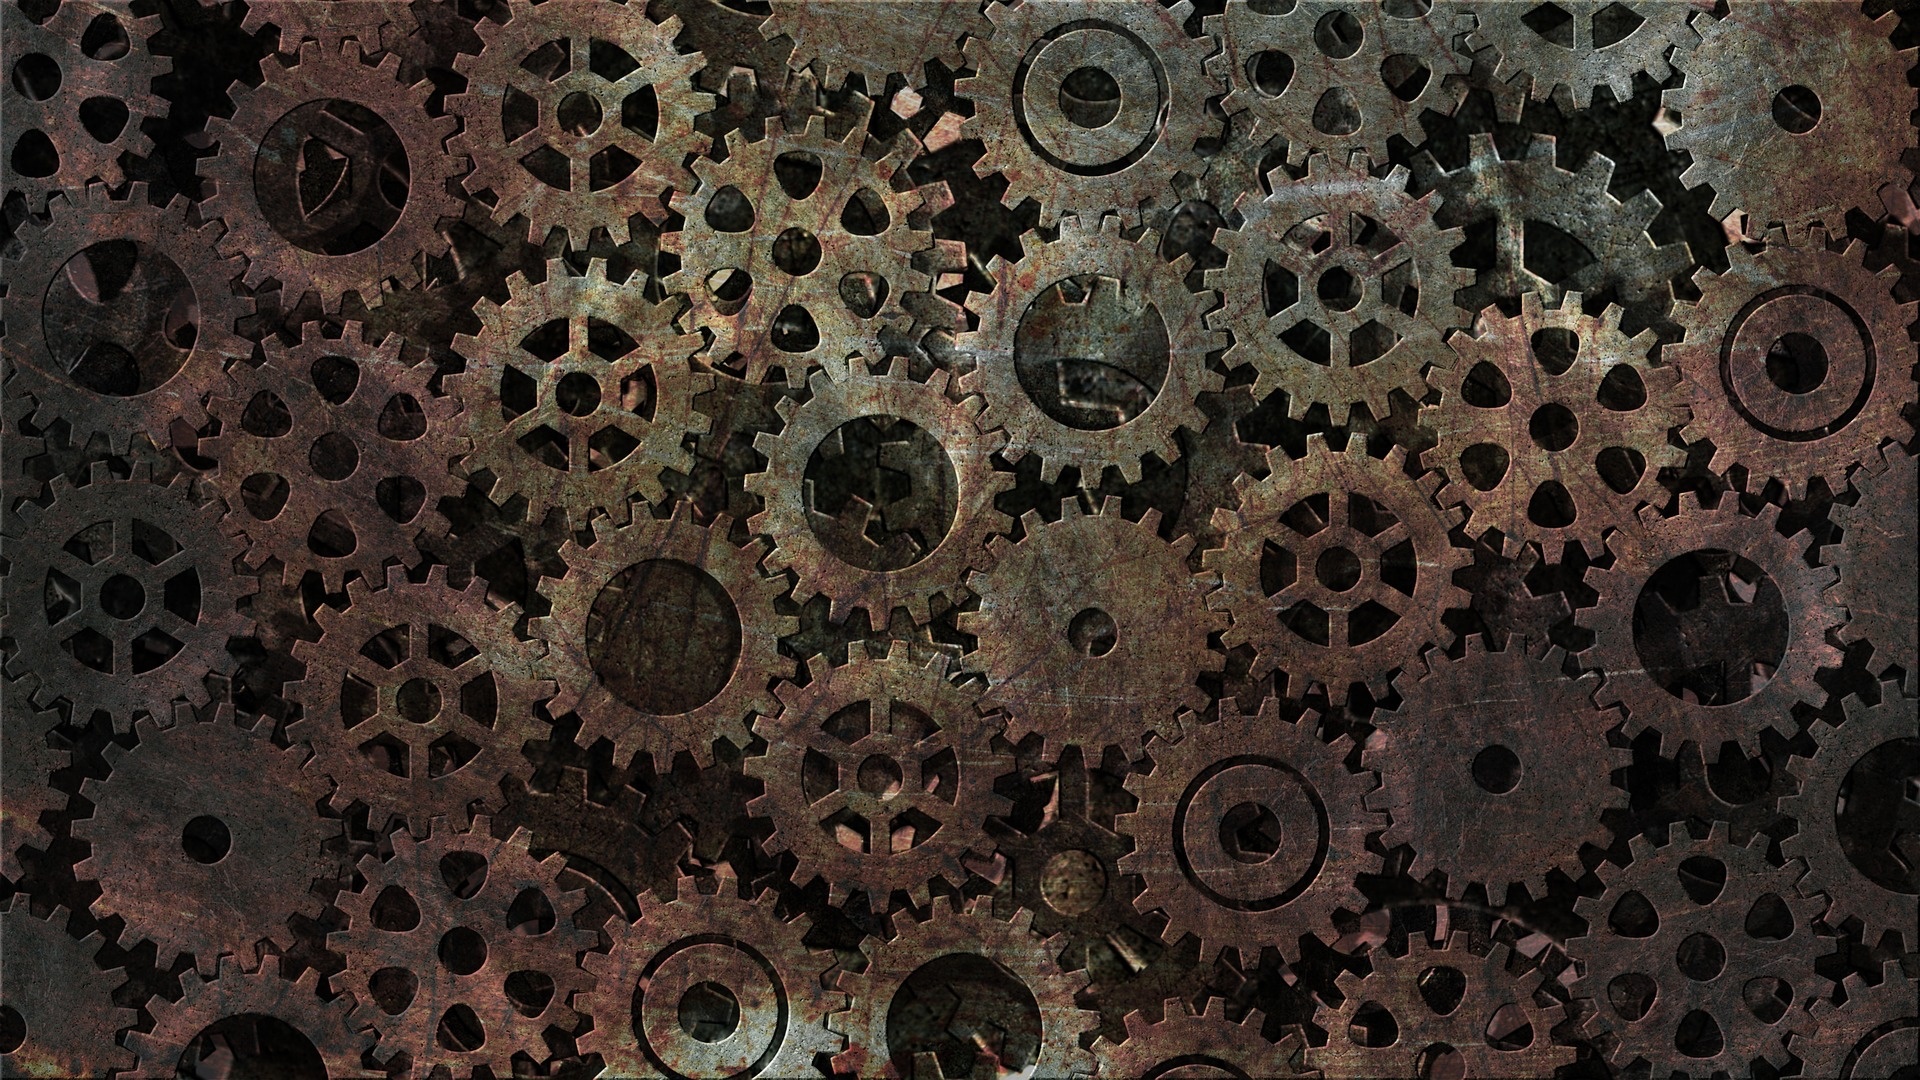 Gears Picture